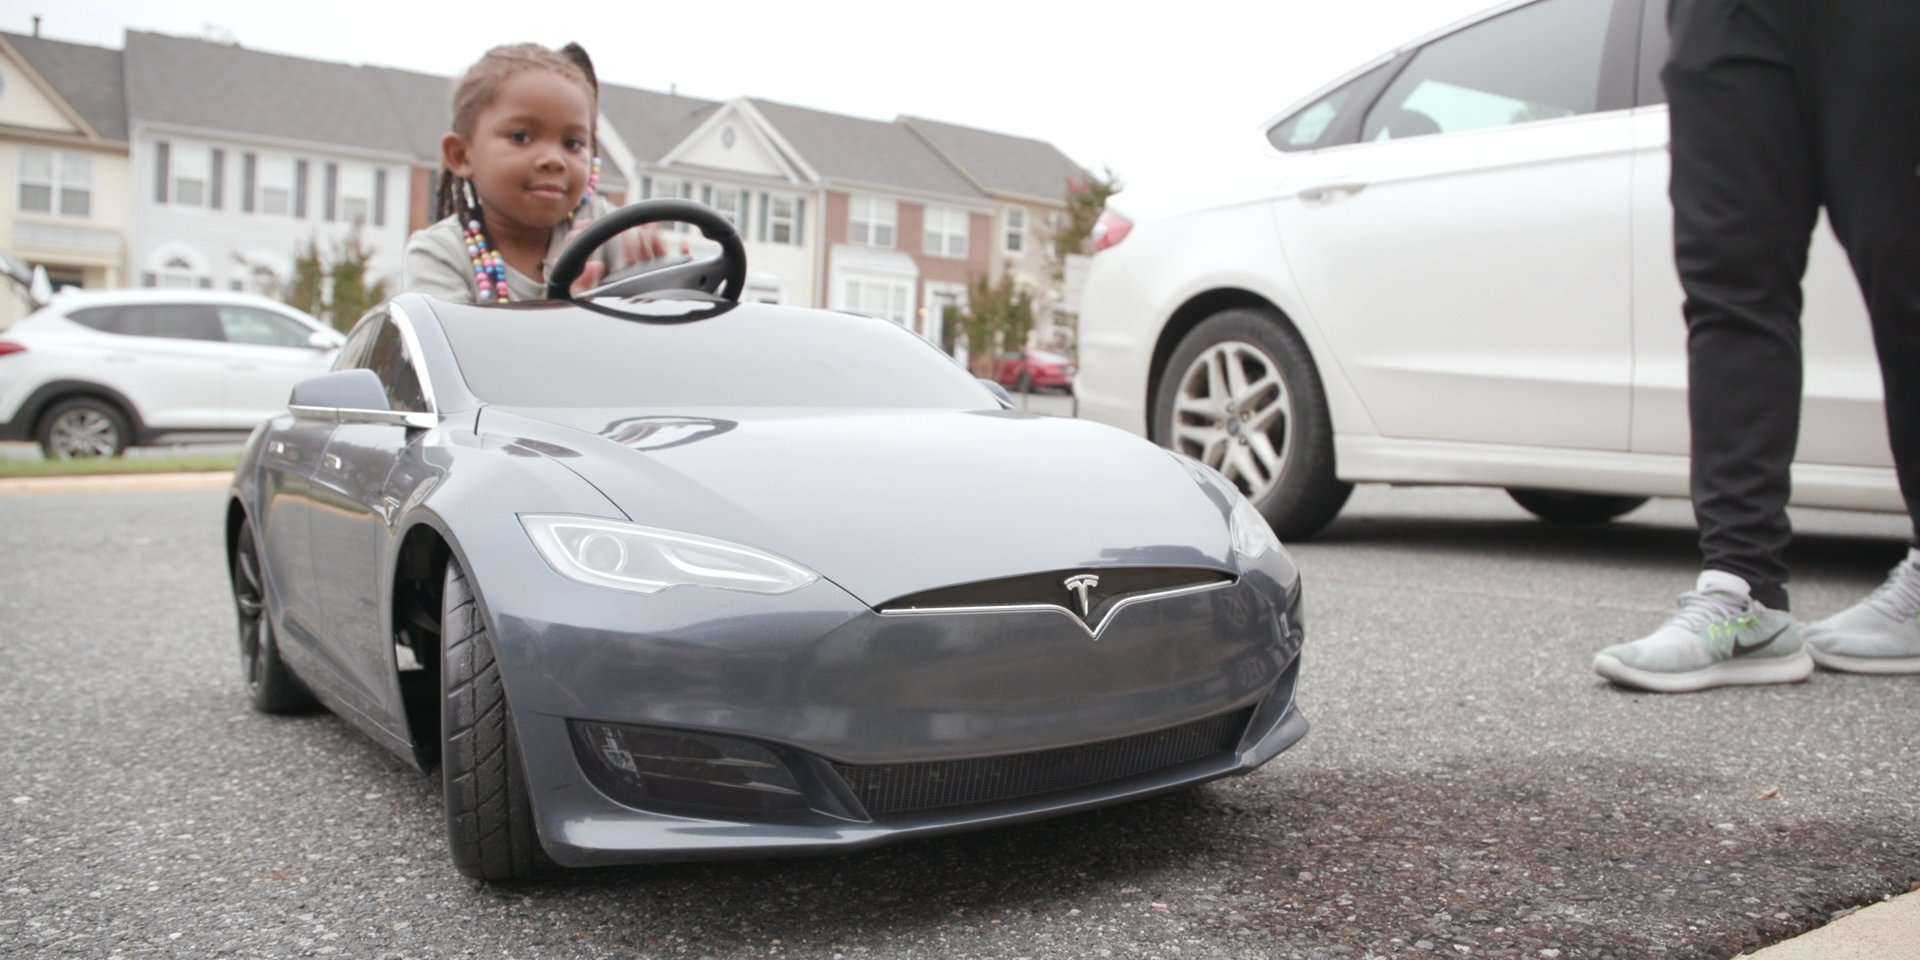 Taboola Ad Example 49715 - Tesla Has A Mini Model S For Kids That Costs $600, And This Family Bought It To Teach Their Child About Driving Electric